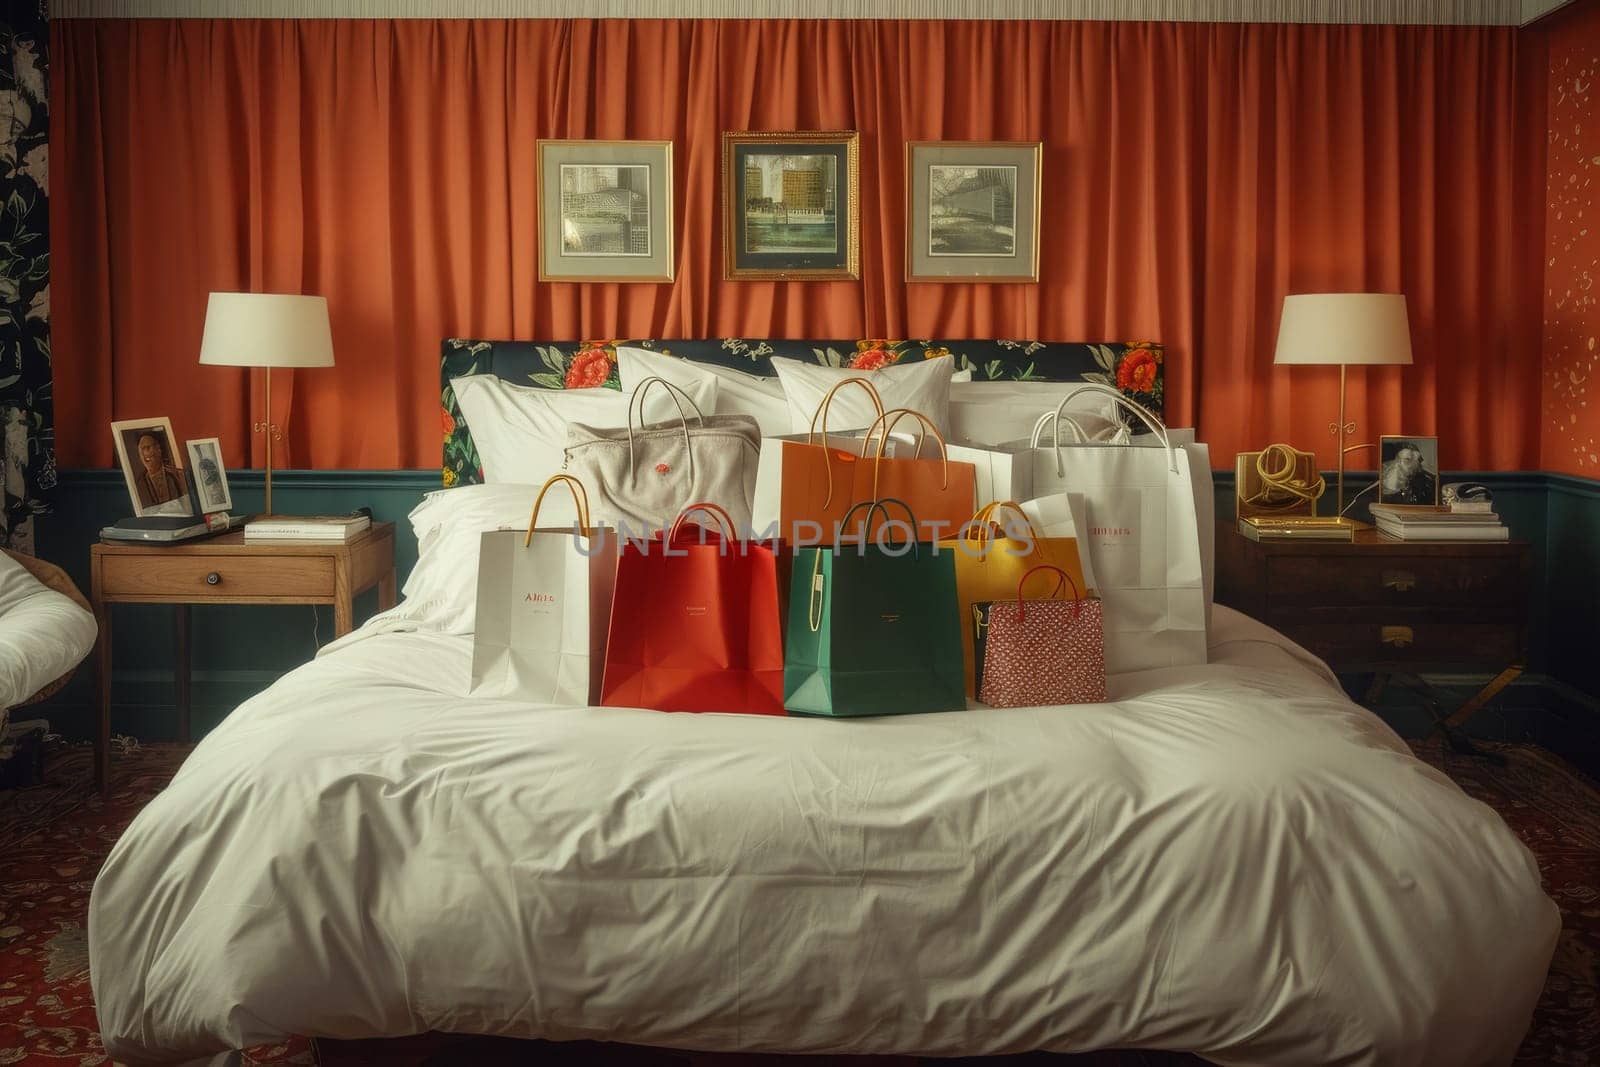 Many Shopping bag on hotel bed. shopping concept by itchaznong